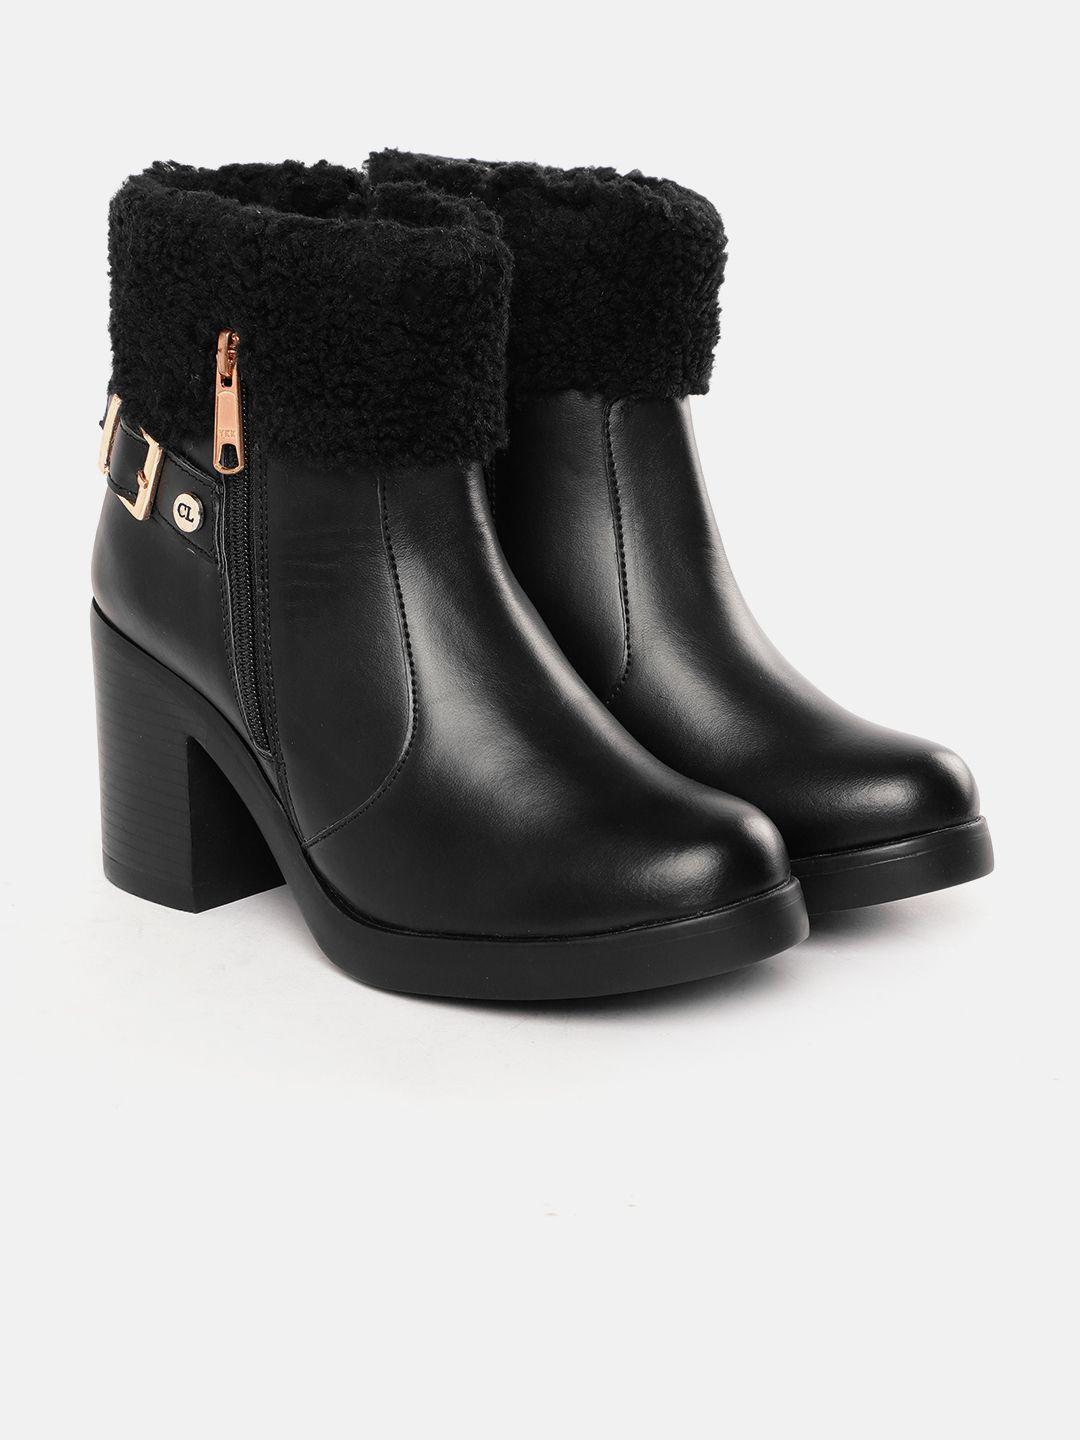 carlton london women heeled boots with faux fur trim and buckle detail